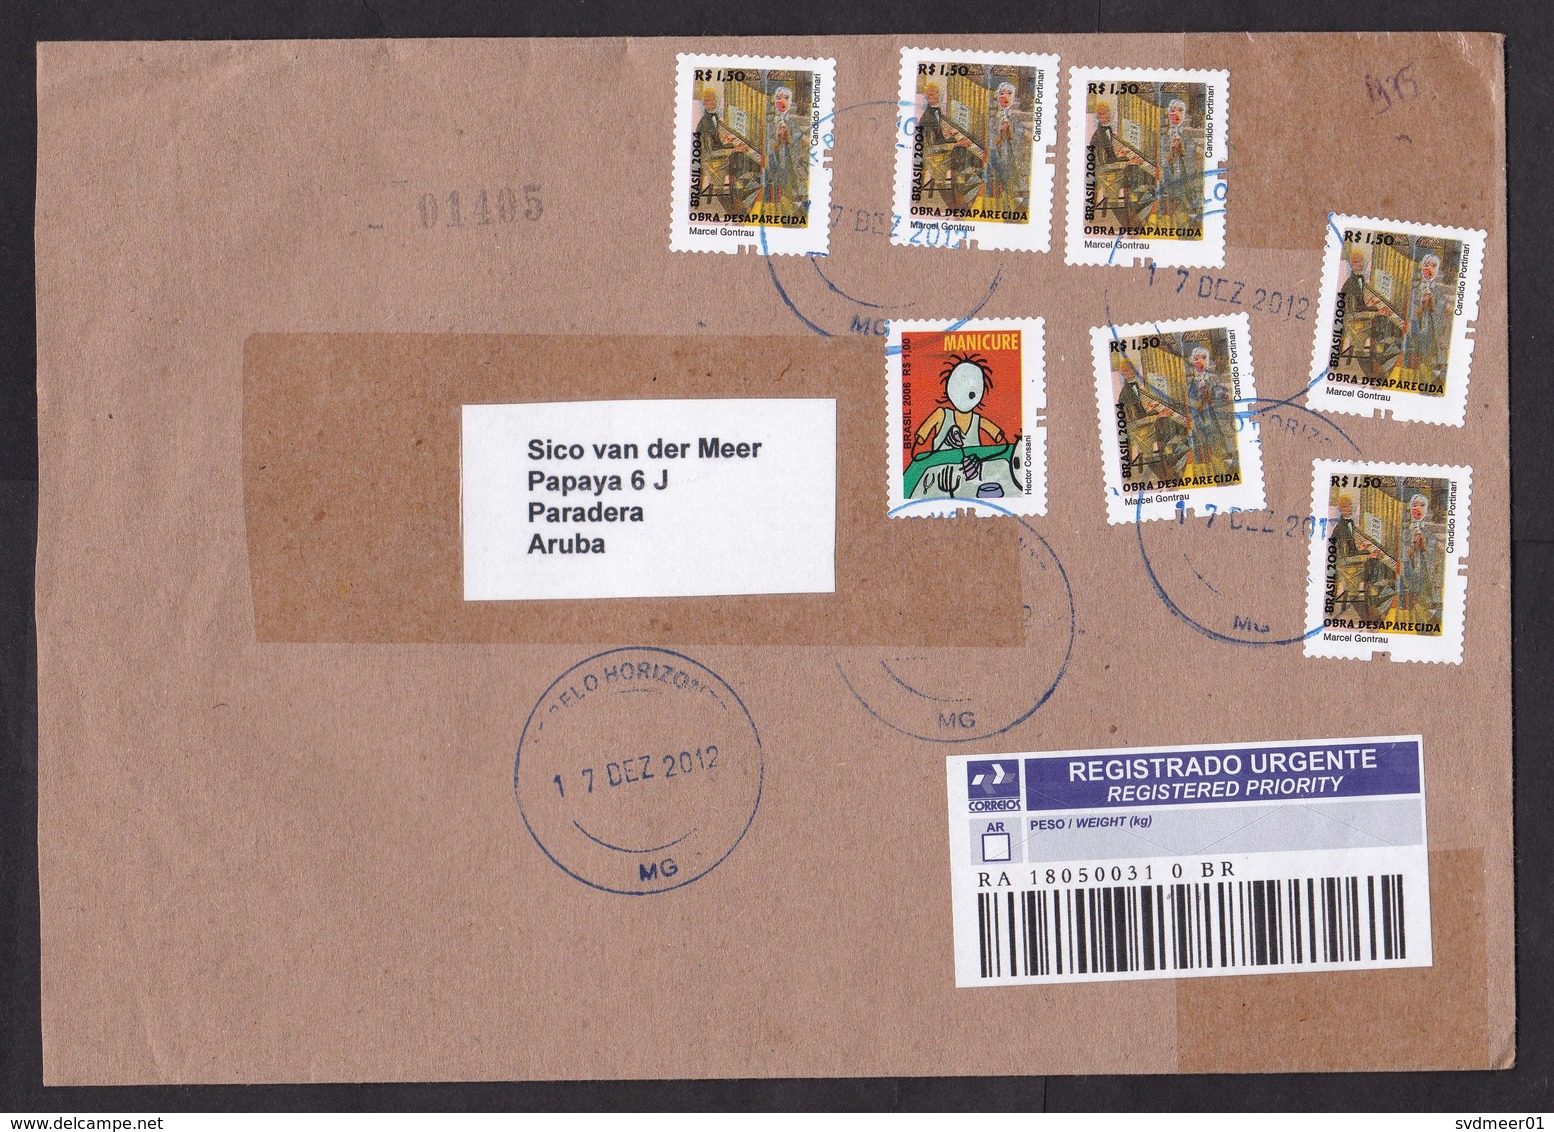 Brazil: Registered Cover To Aruba, 2012, 7 Stamps, Piano, Music, Manicure, Transit Via Trinidad, R-label (traces Of Use) - Covers & Documents